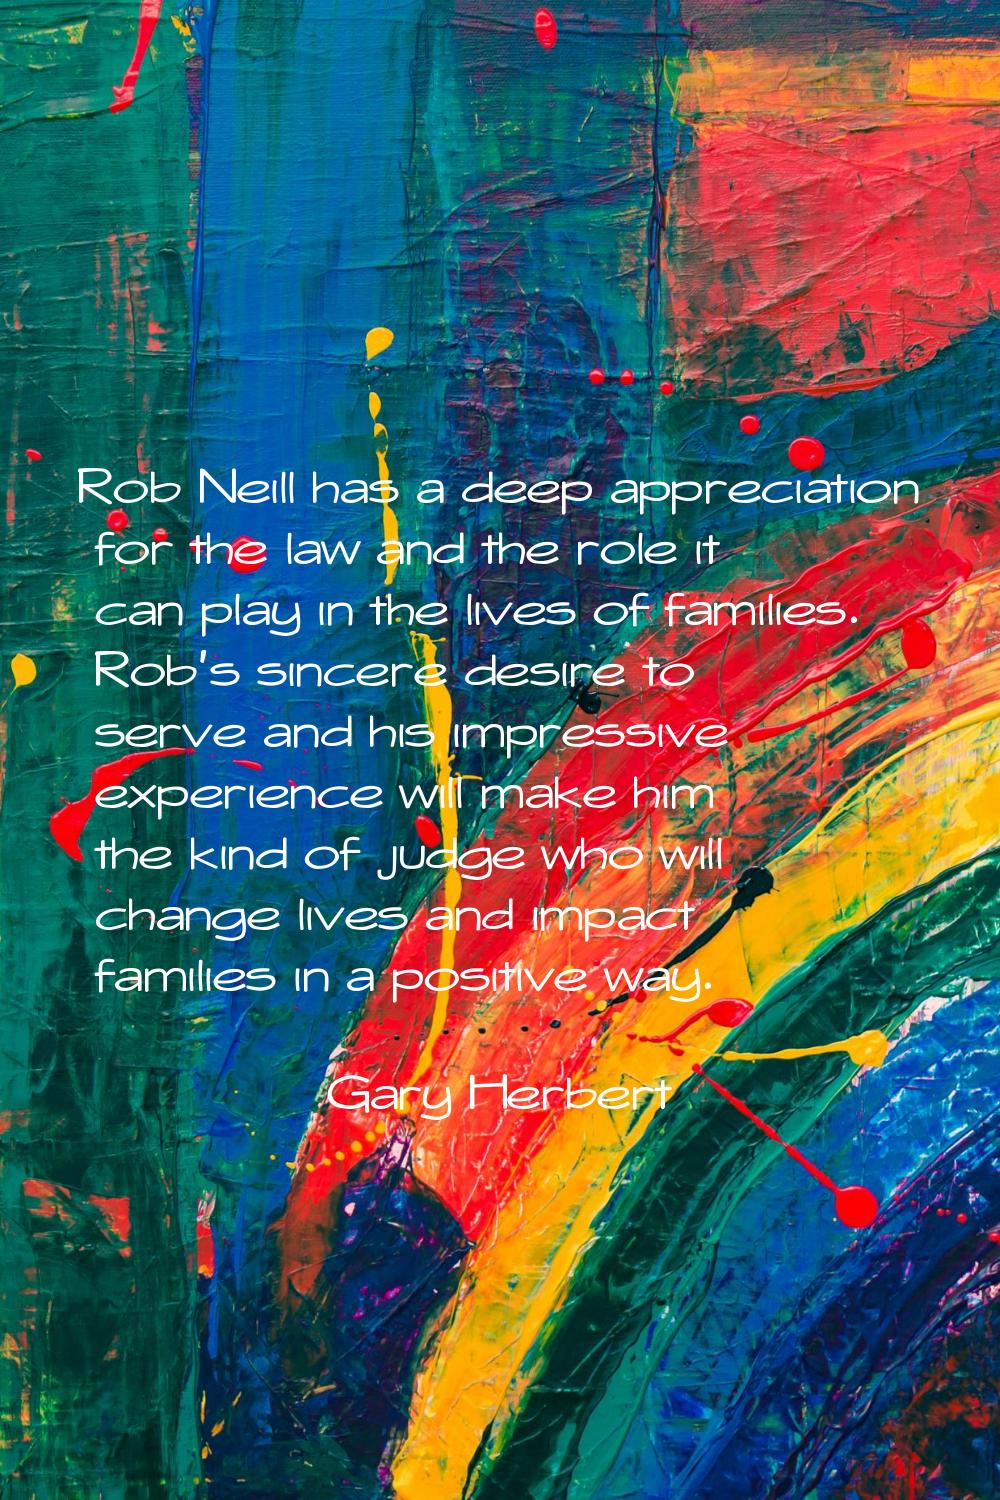 Rob Neill has a deep appreciation for the law and the role it can play in the lives of families. Ro